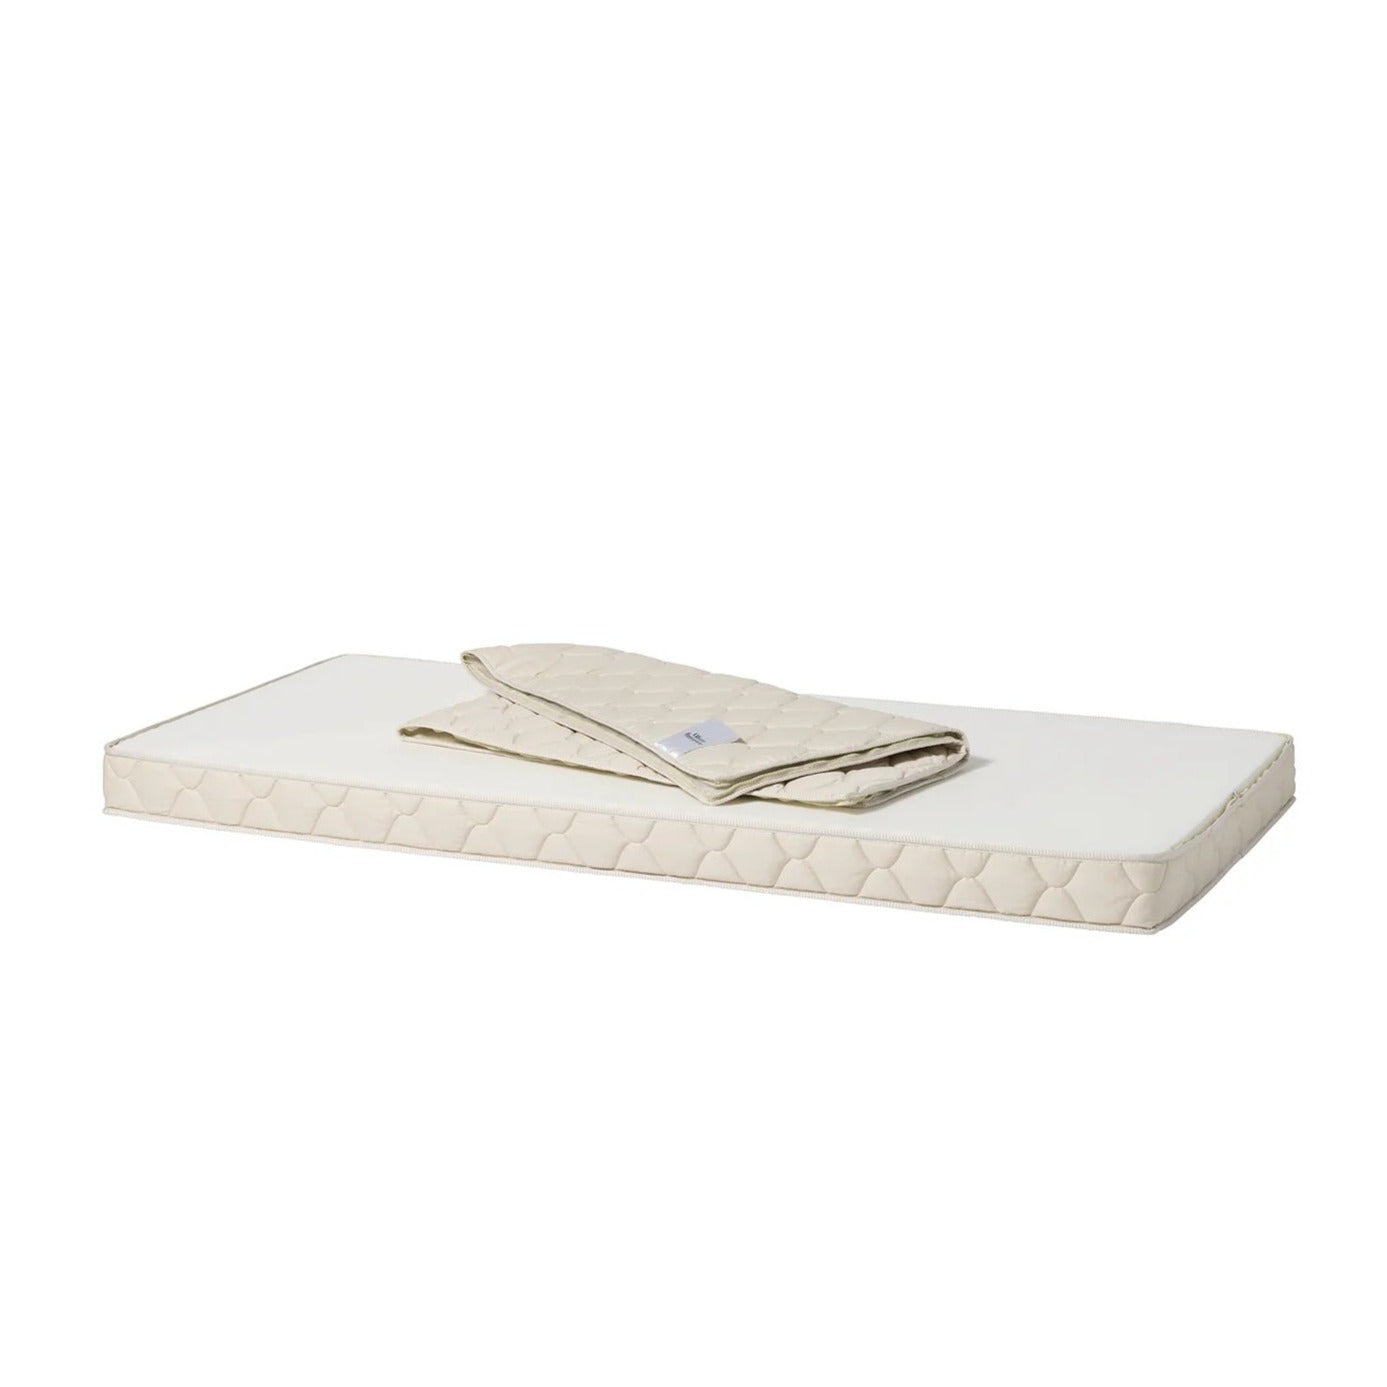 Oliver Furniture Mattress for Seaside Classic Beds - 90 x 200cm